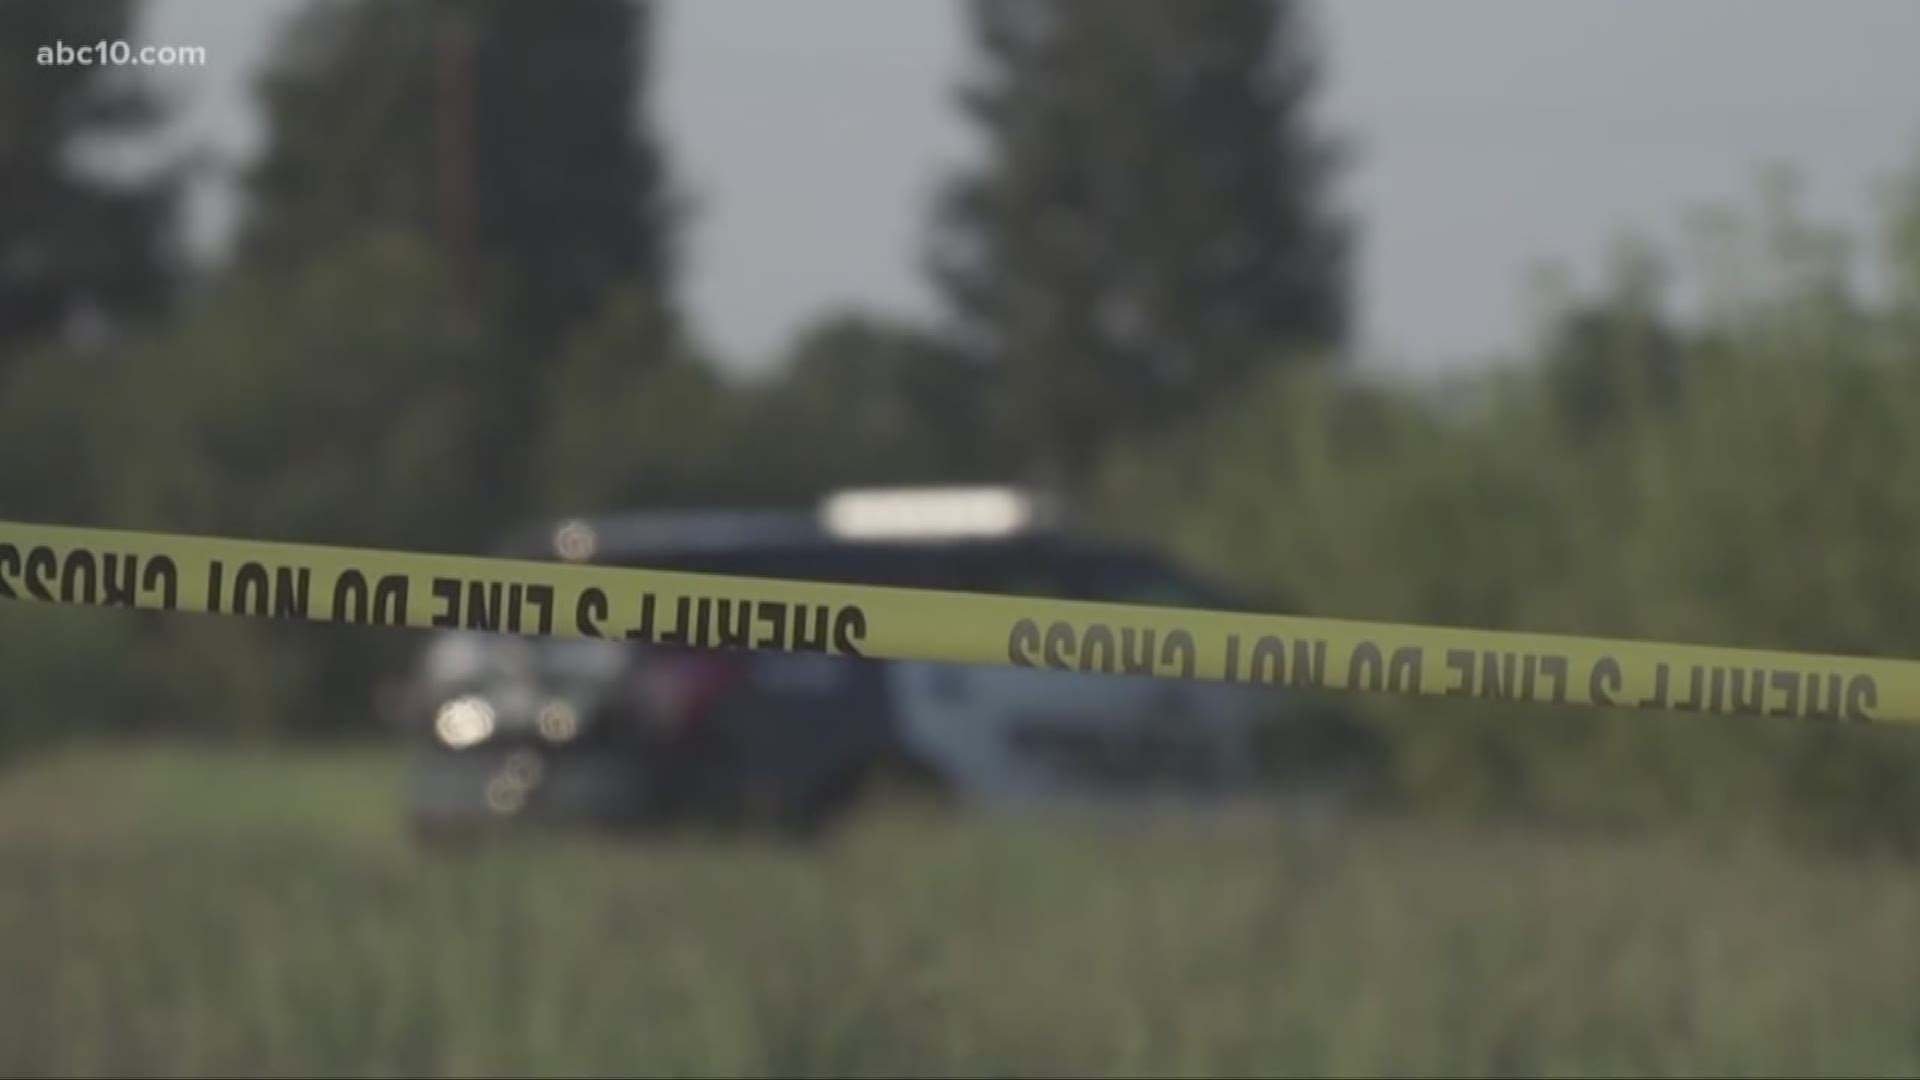 A 15-year-old boy is dead and four other people are being held after a police pursuit and officer-involved shooting in Stanislaus County on Saturday, according to officials.